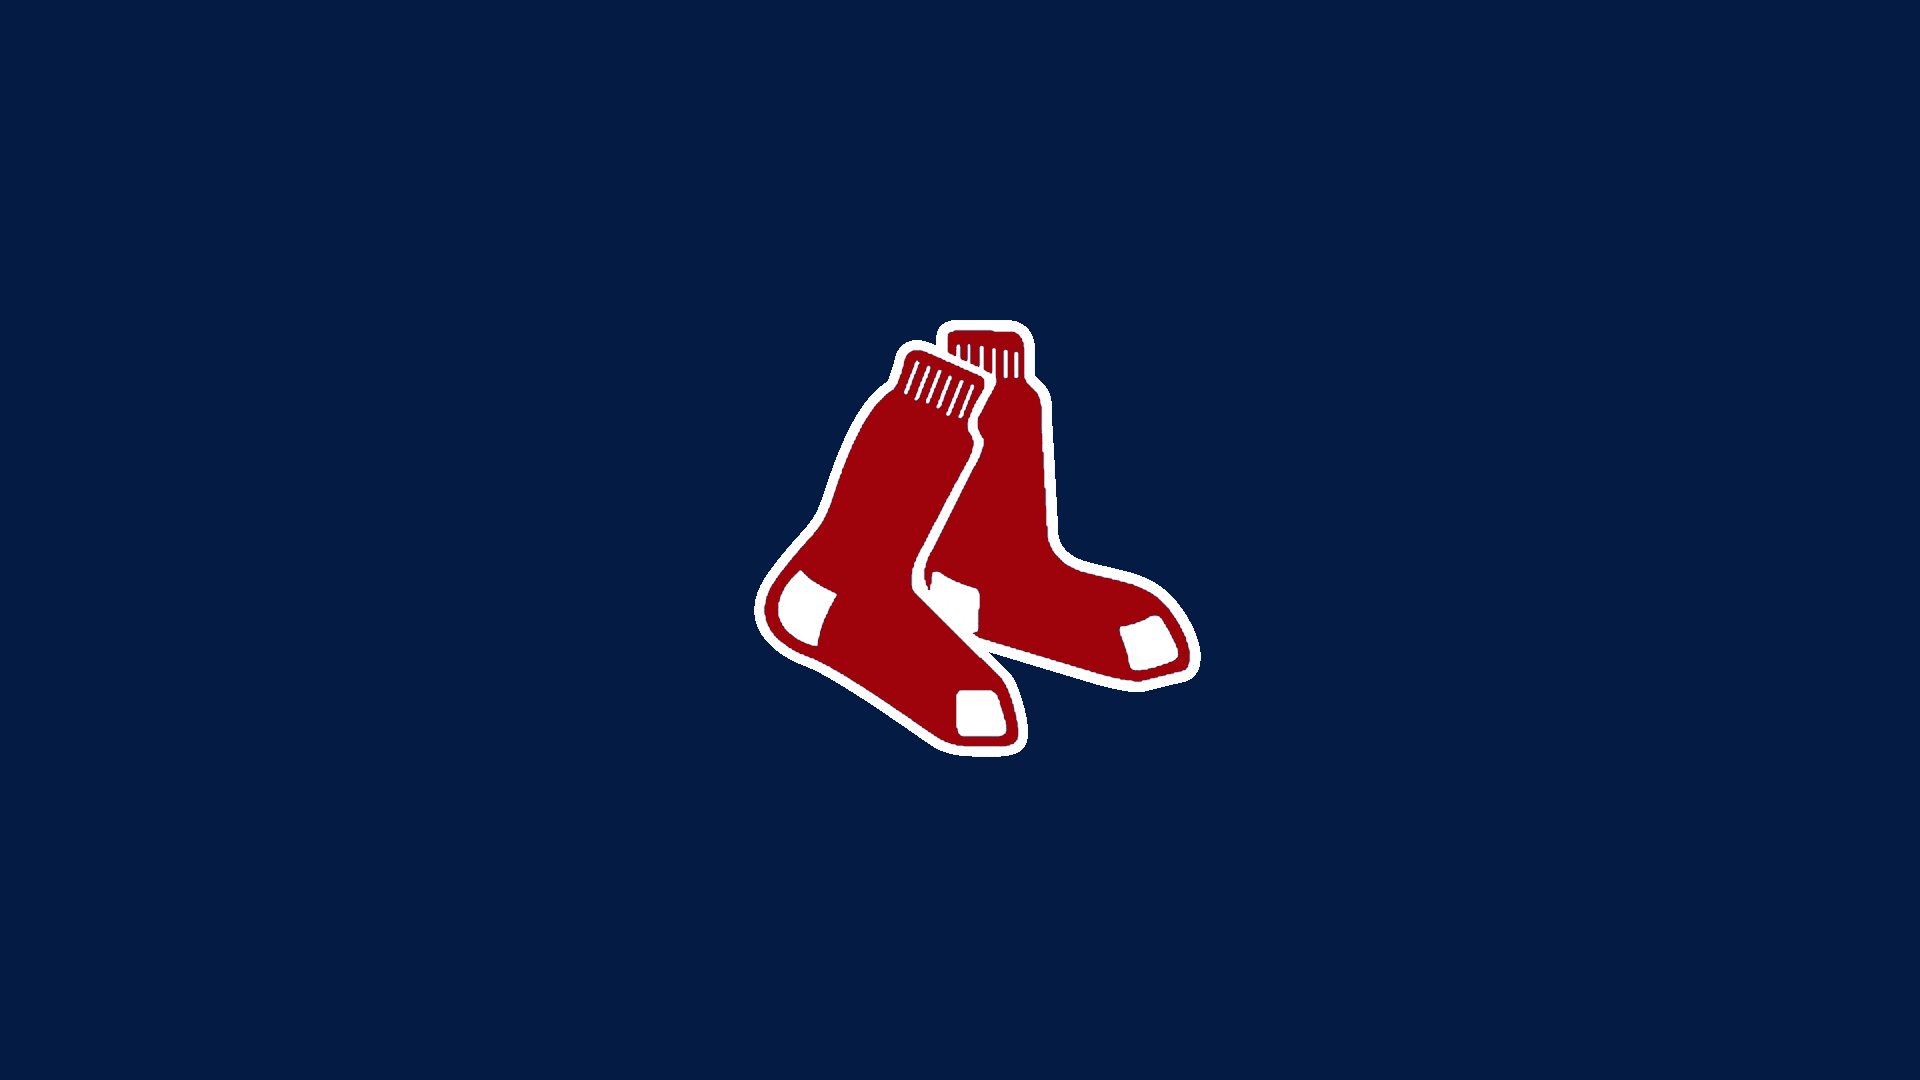 Red Sox Wallpaper Image Amp Pictures Becuo